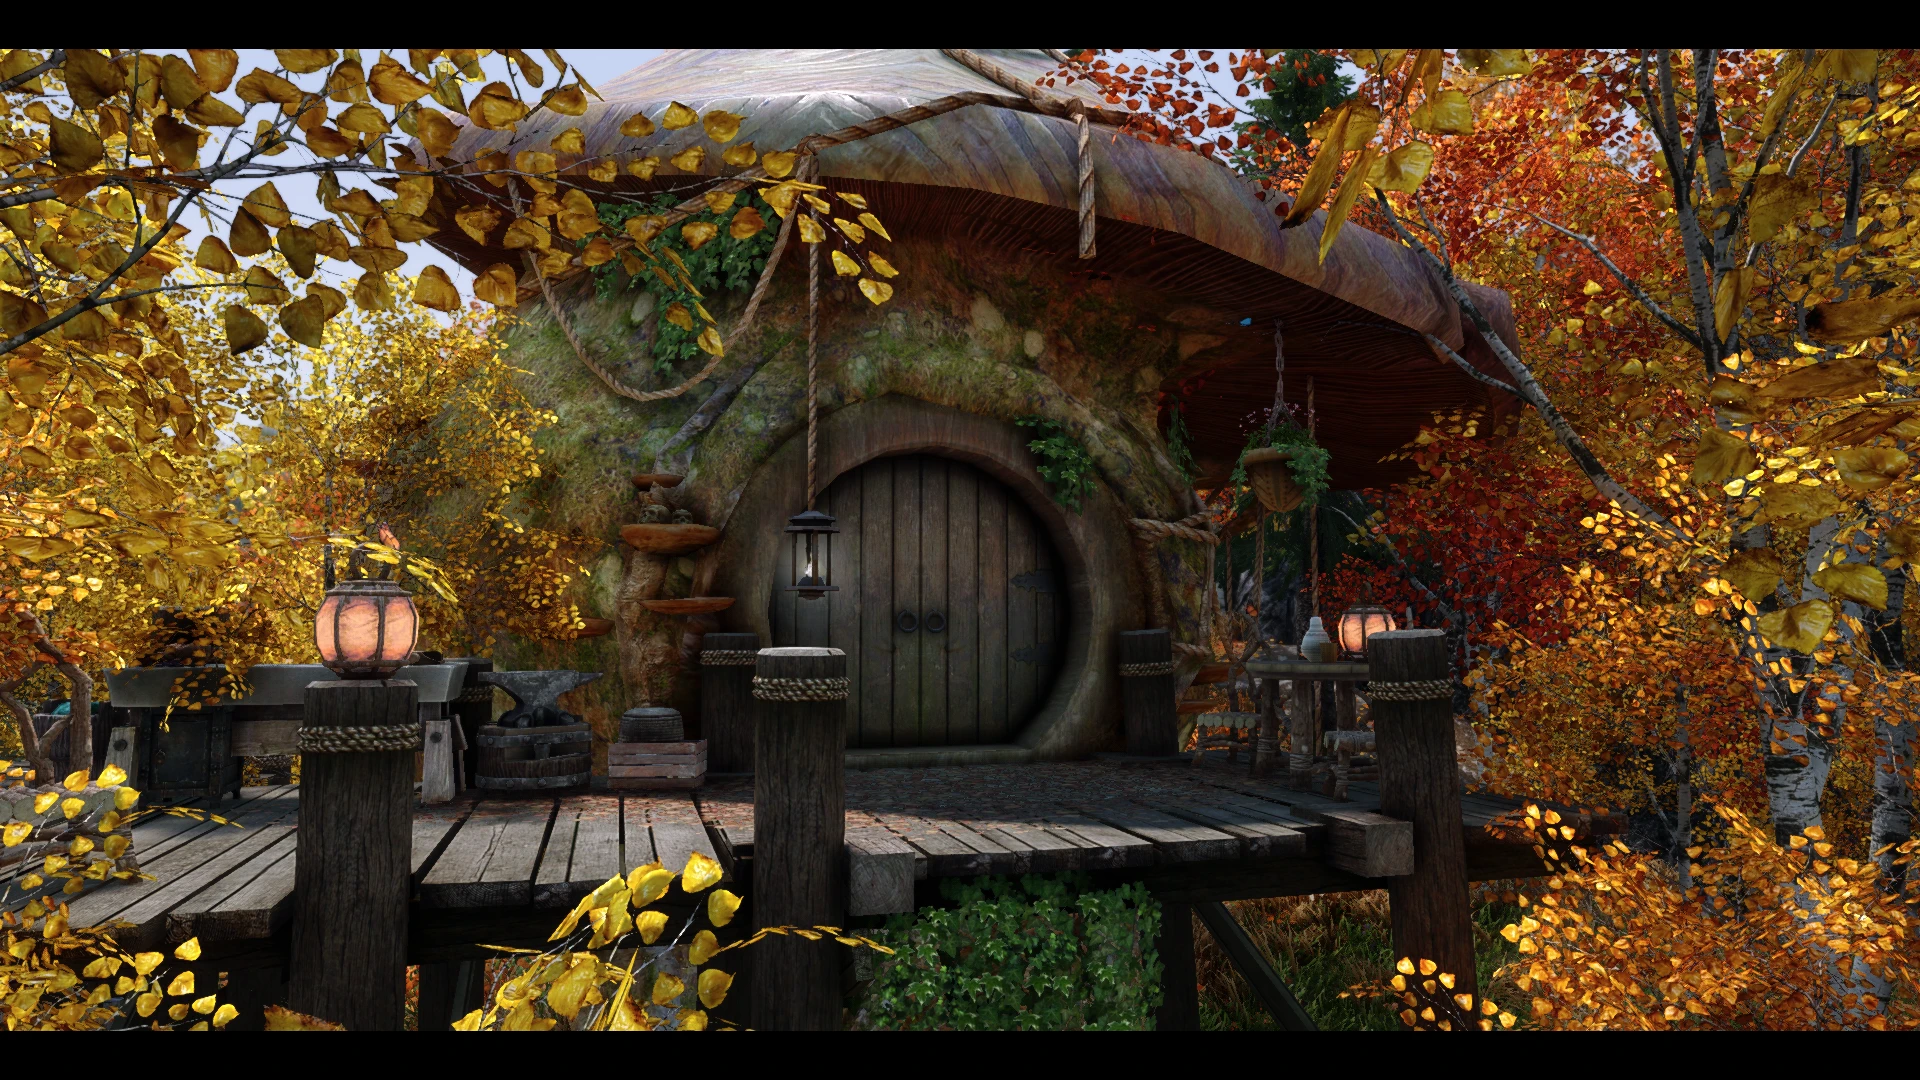 Valkyrie Skyrim Mods - This is Wind Path a small player home mod. This is  one of the very small few player homes currently that is mostly having the  player interact with